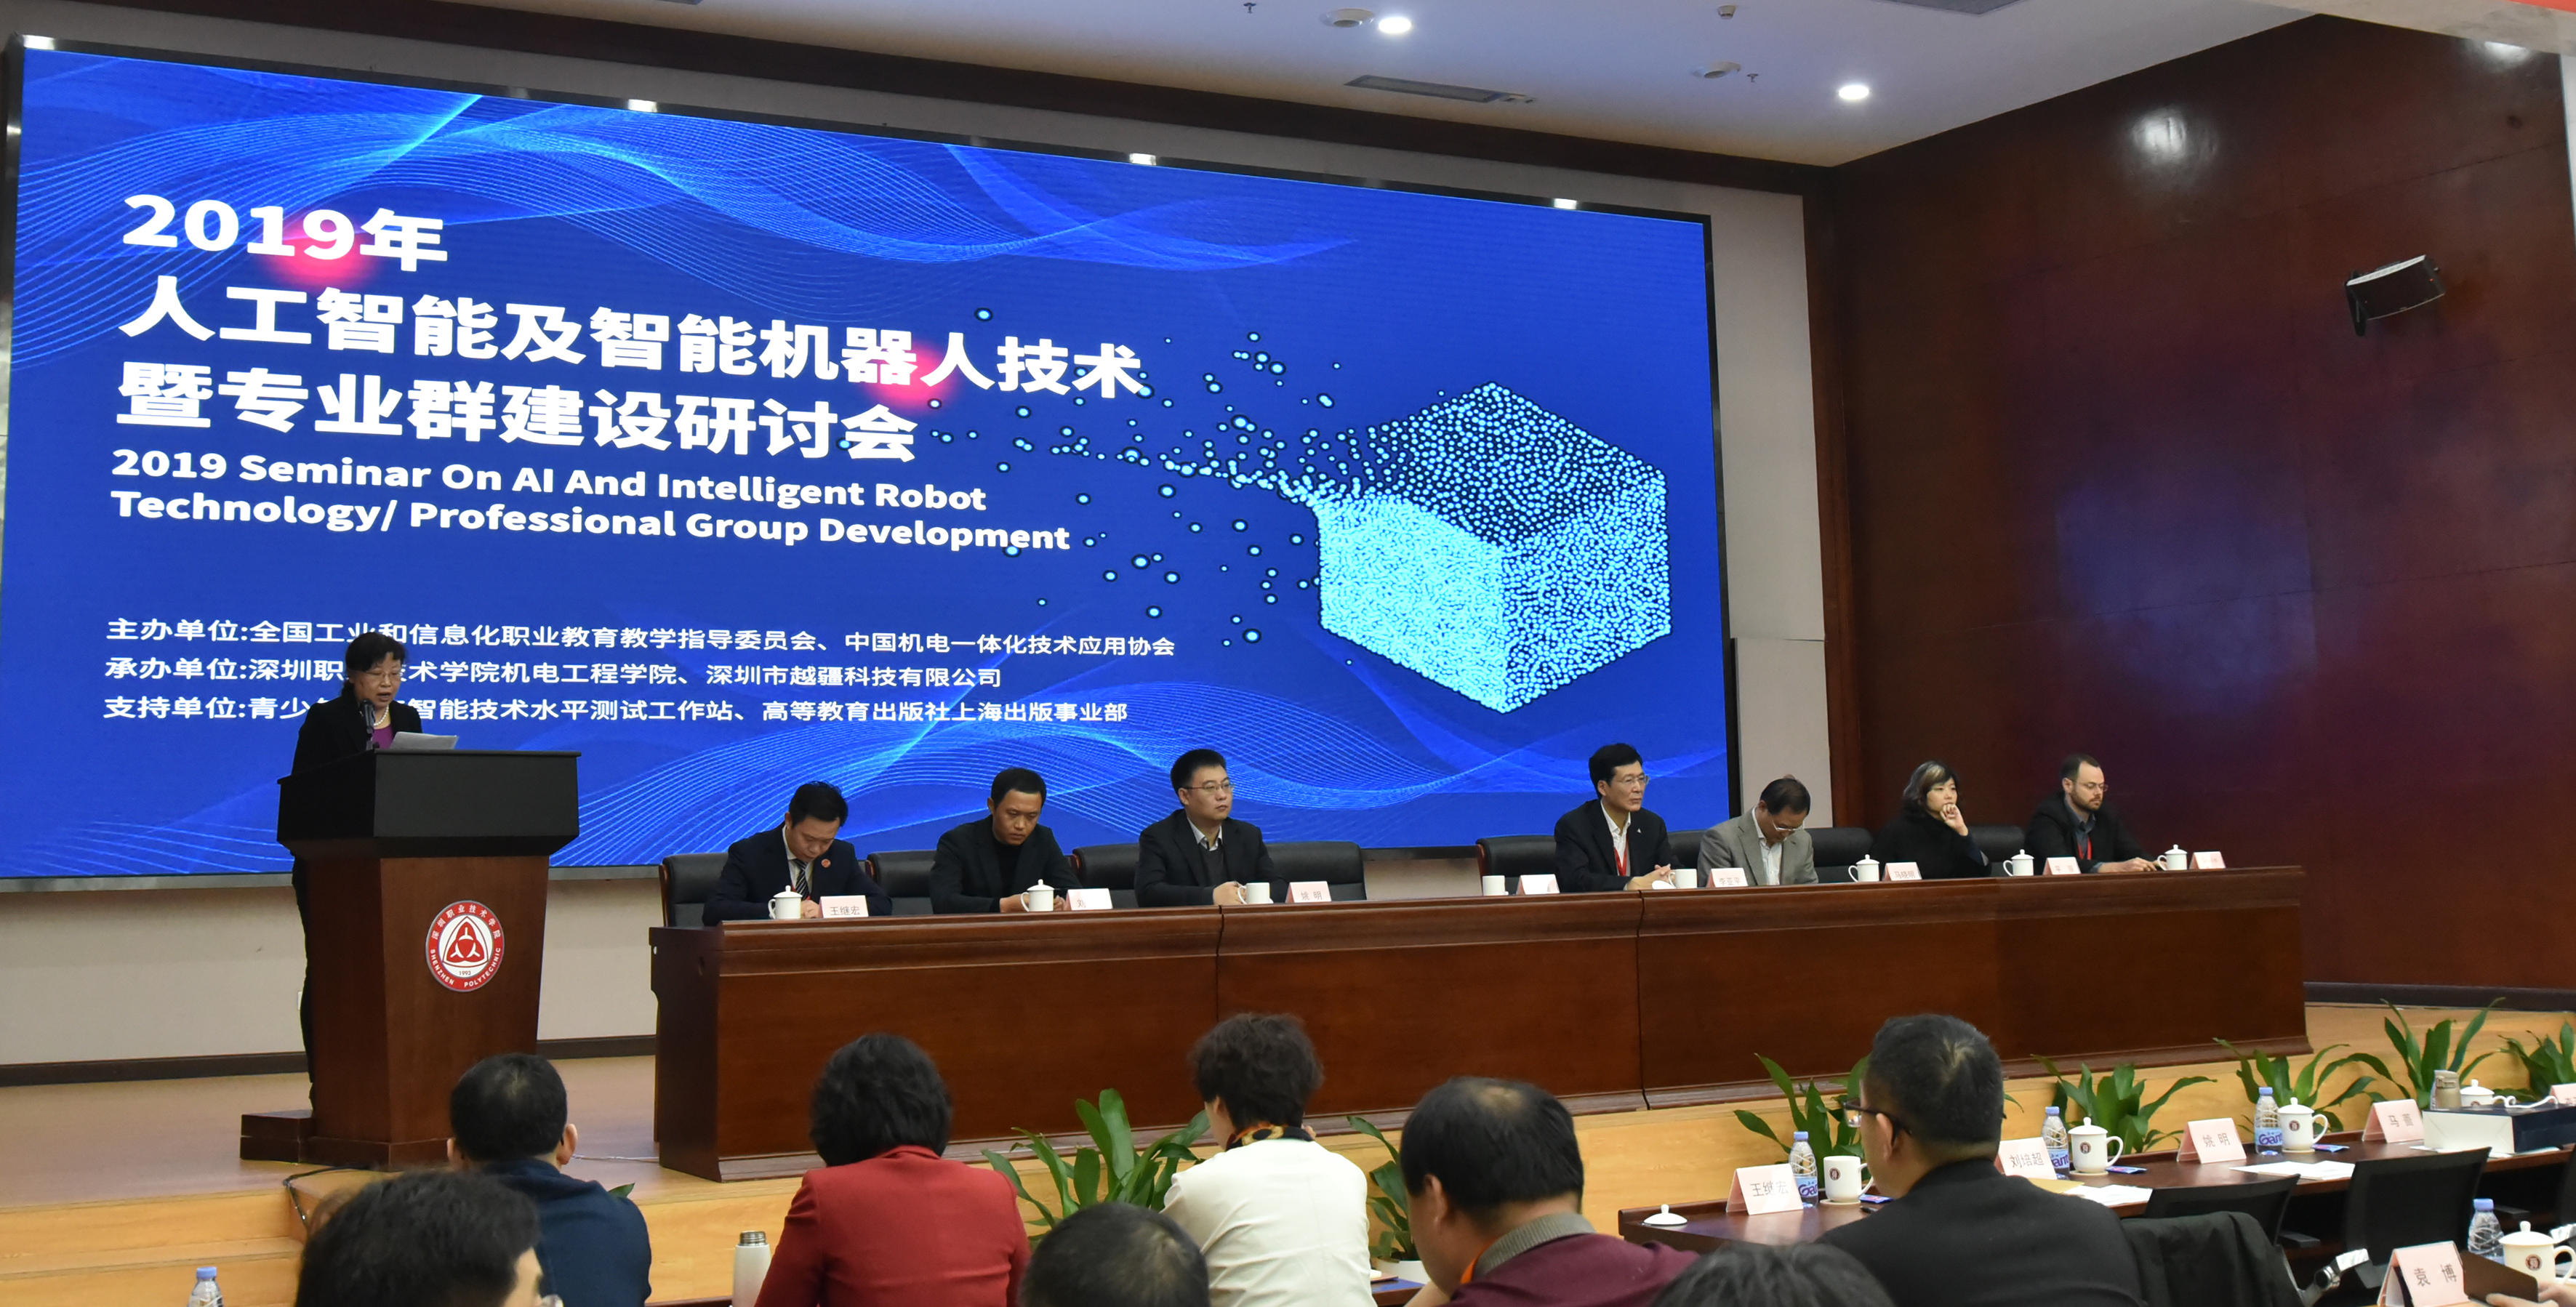 2019 AI Seminar Calls for New Mode of University-Enterprise Cooperation to Better Cultivate Talents in the New Era